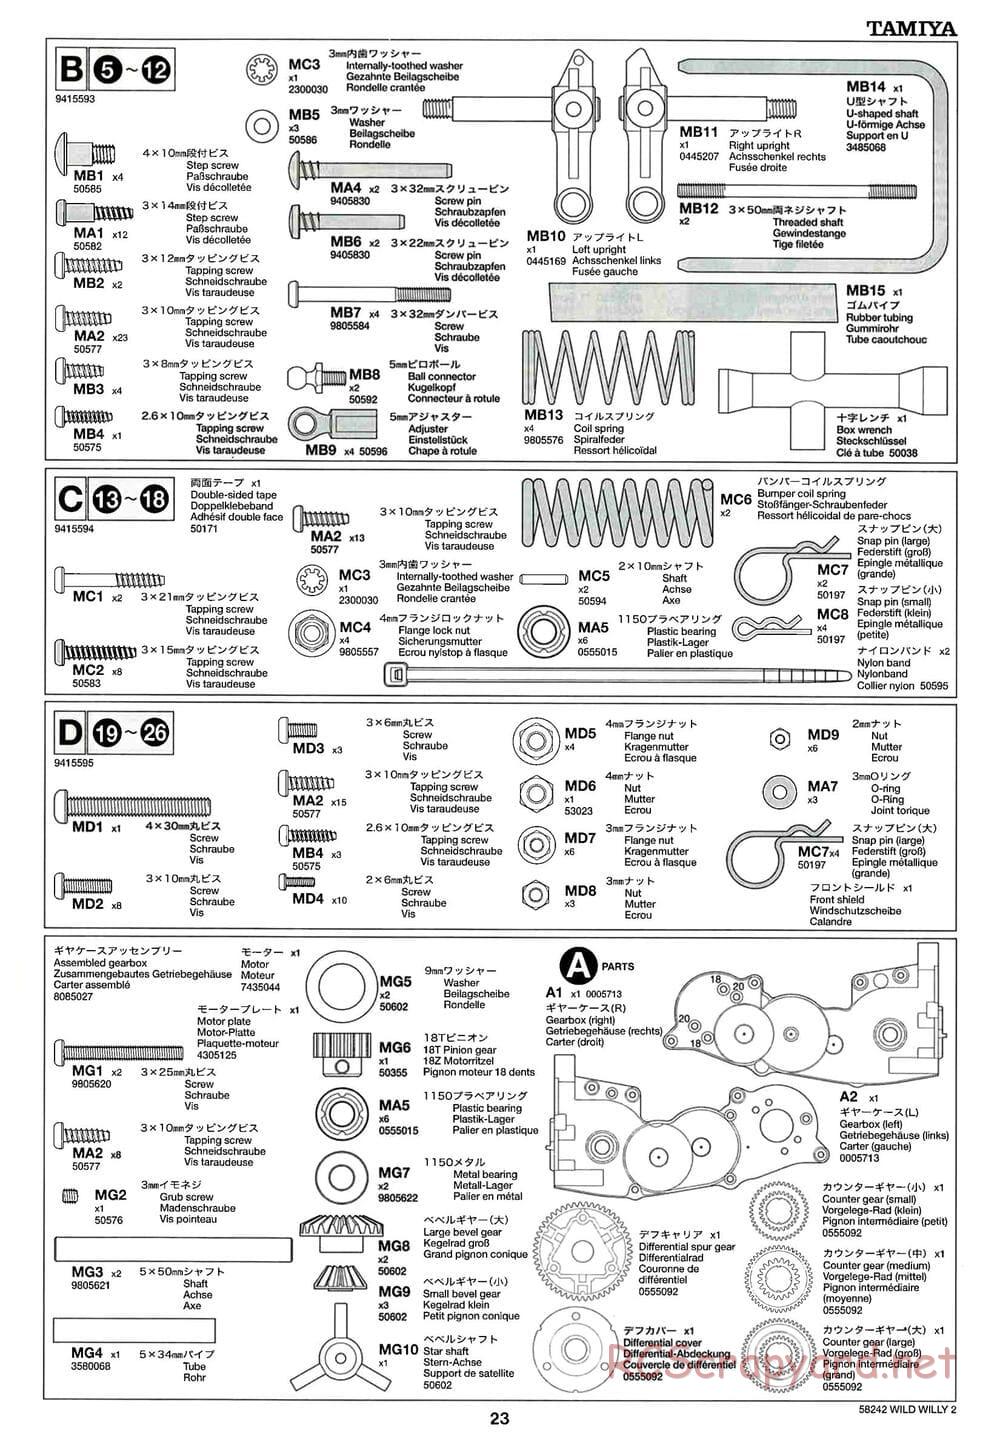 Tamiya - Wild Willy 2 - WR-02 Chassis - Manual - Page 23